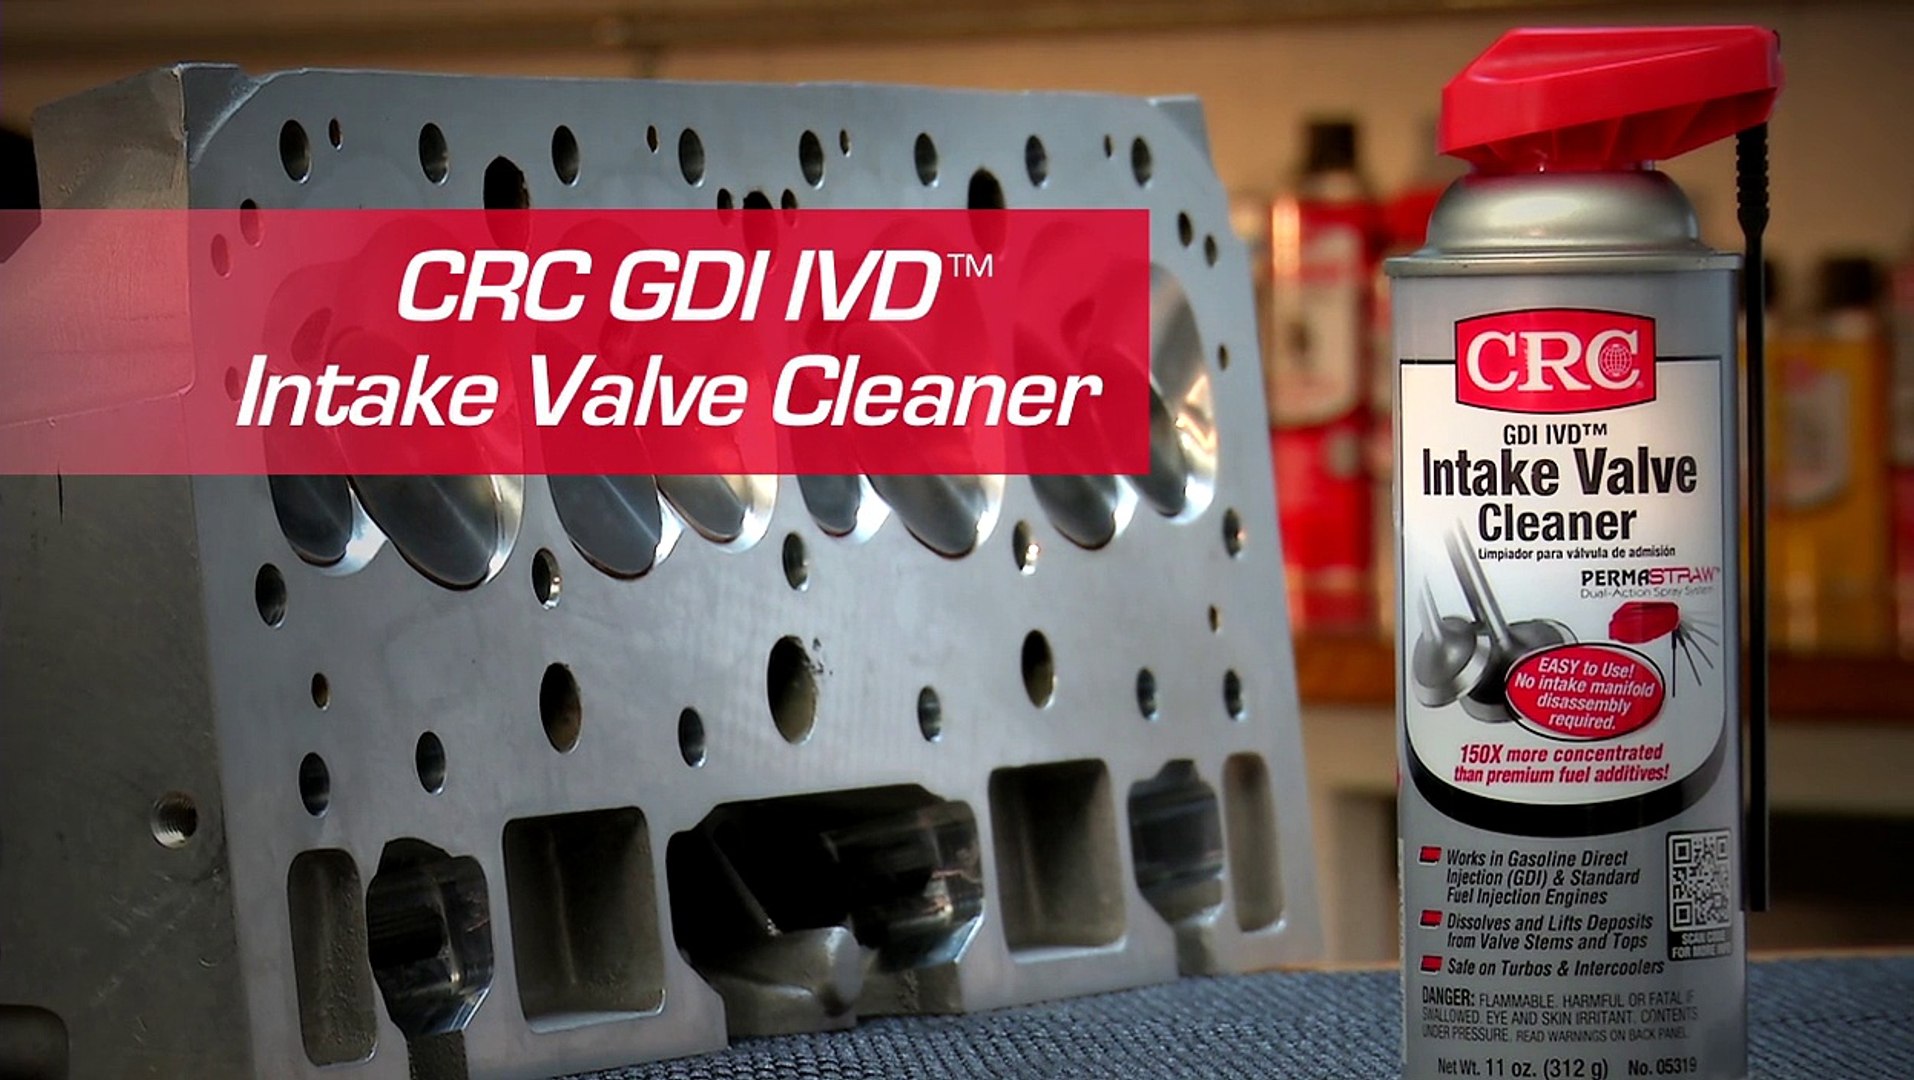 CRC GDI IVD™ Intake Valve Cleaner Demo Video - video Dailymotion